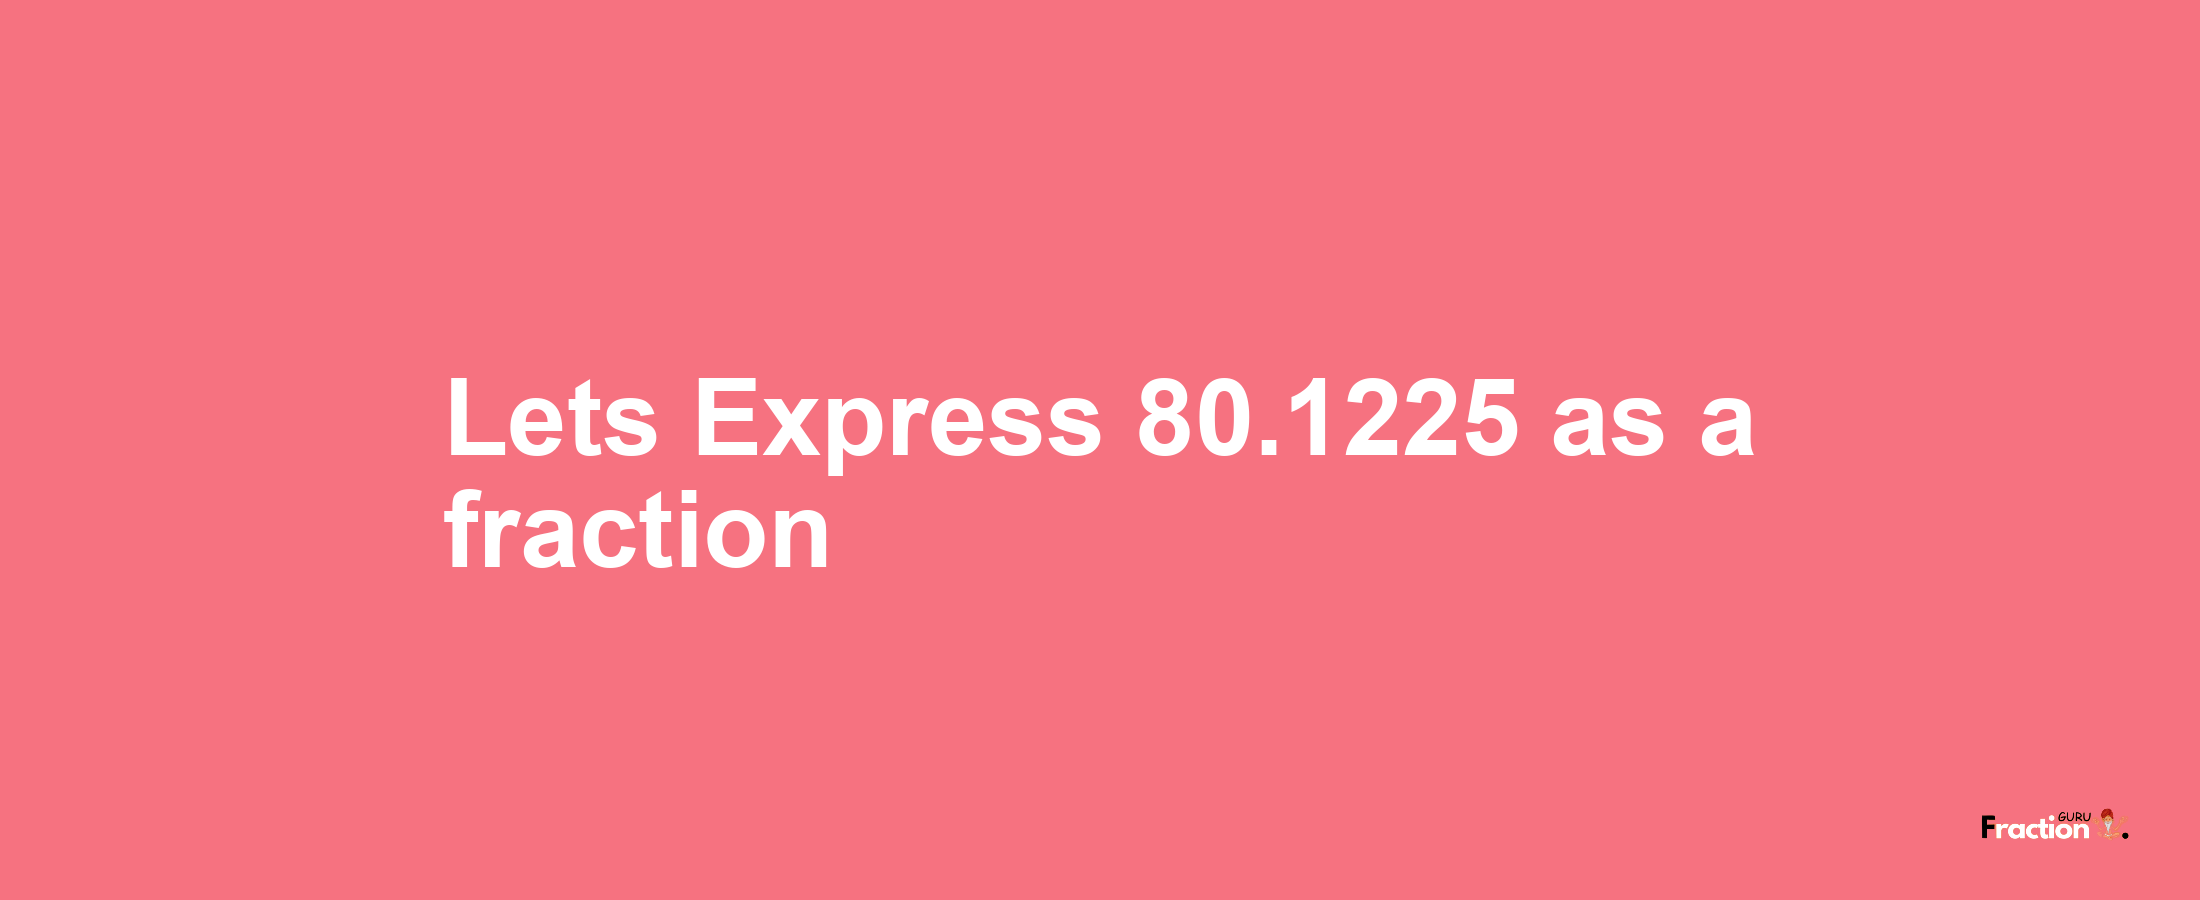 Lets Express 80.1225 as afraction